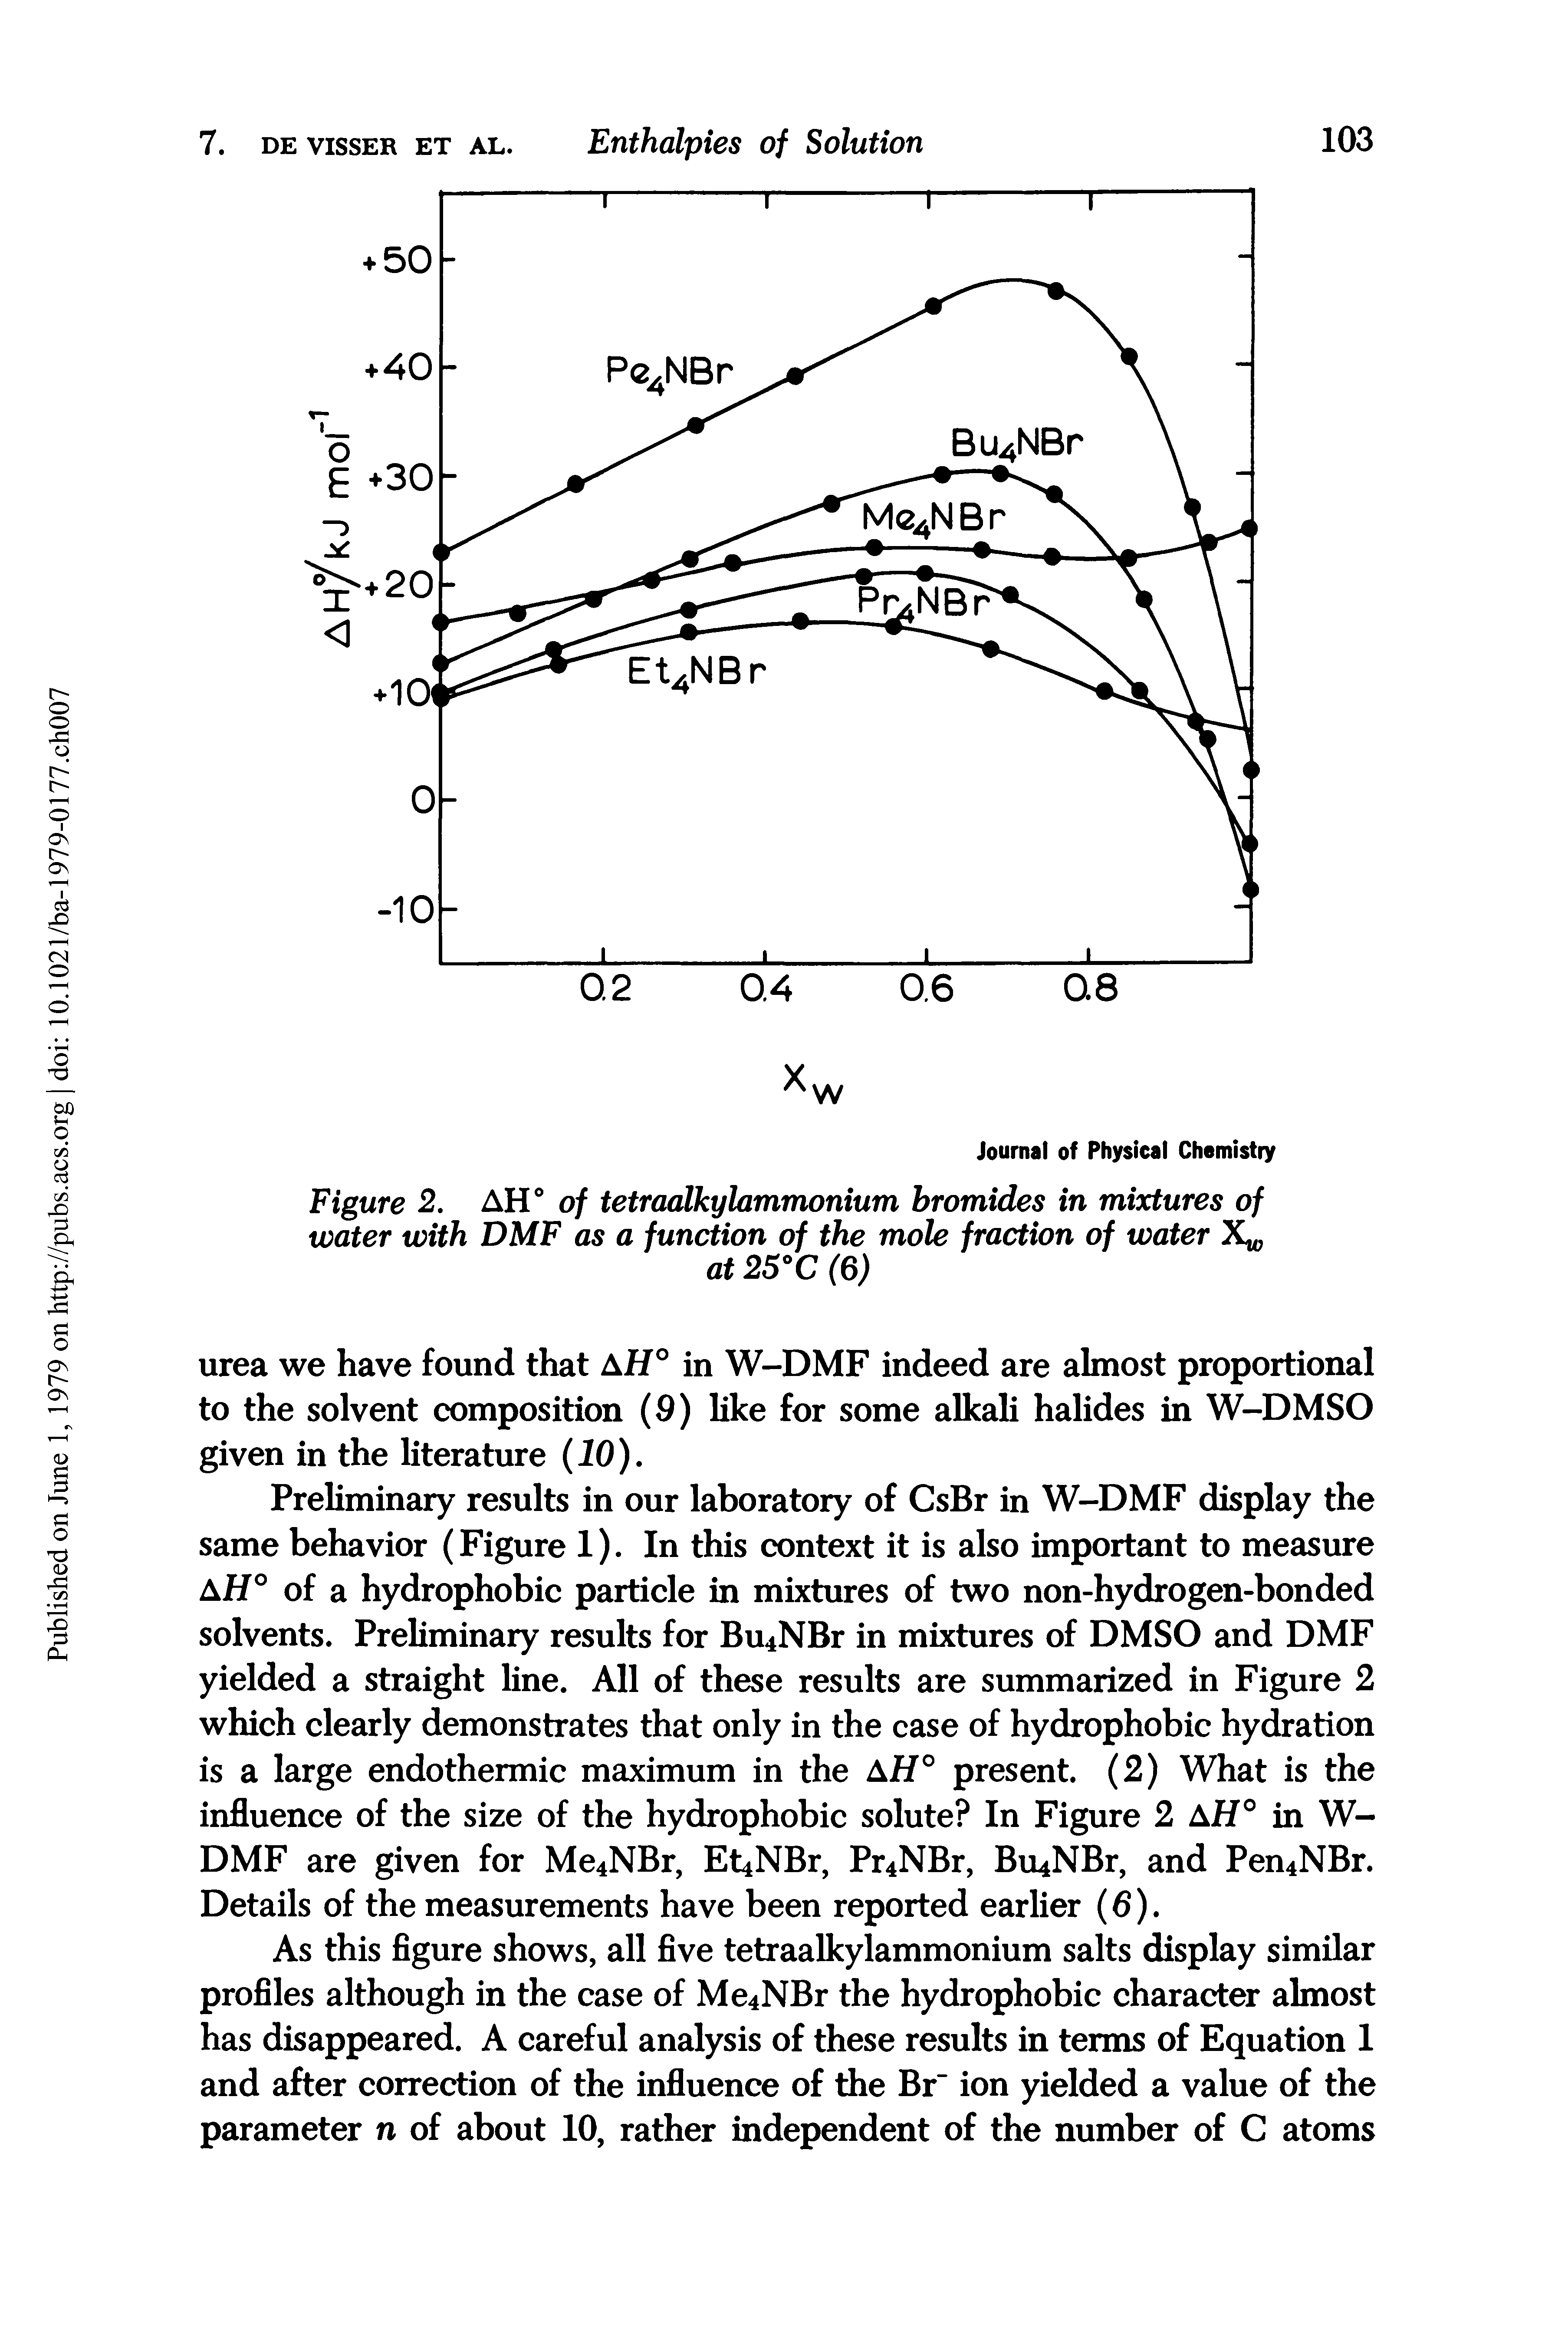 Figure 2. AH° of tetraalkylammonium bromides in mixtures of water with DMF as a function of the mole fraction of water...